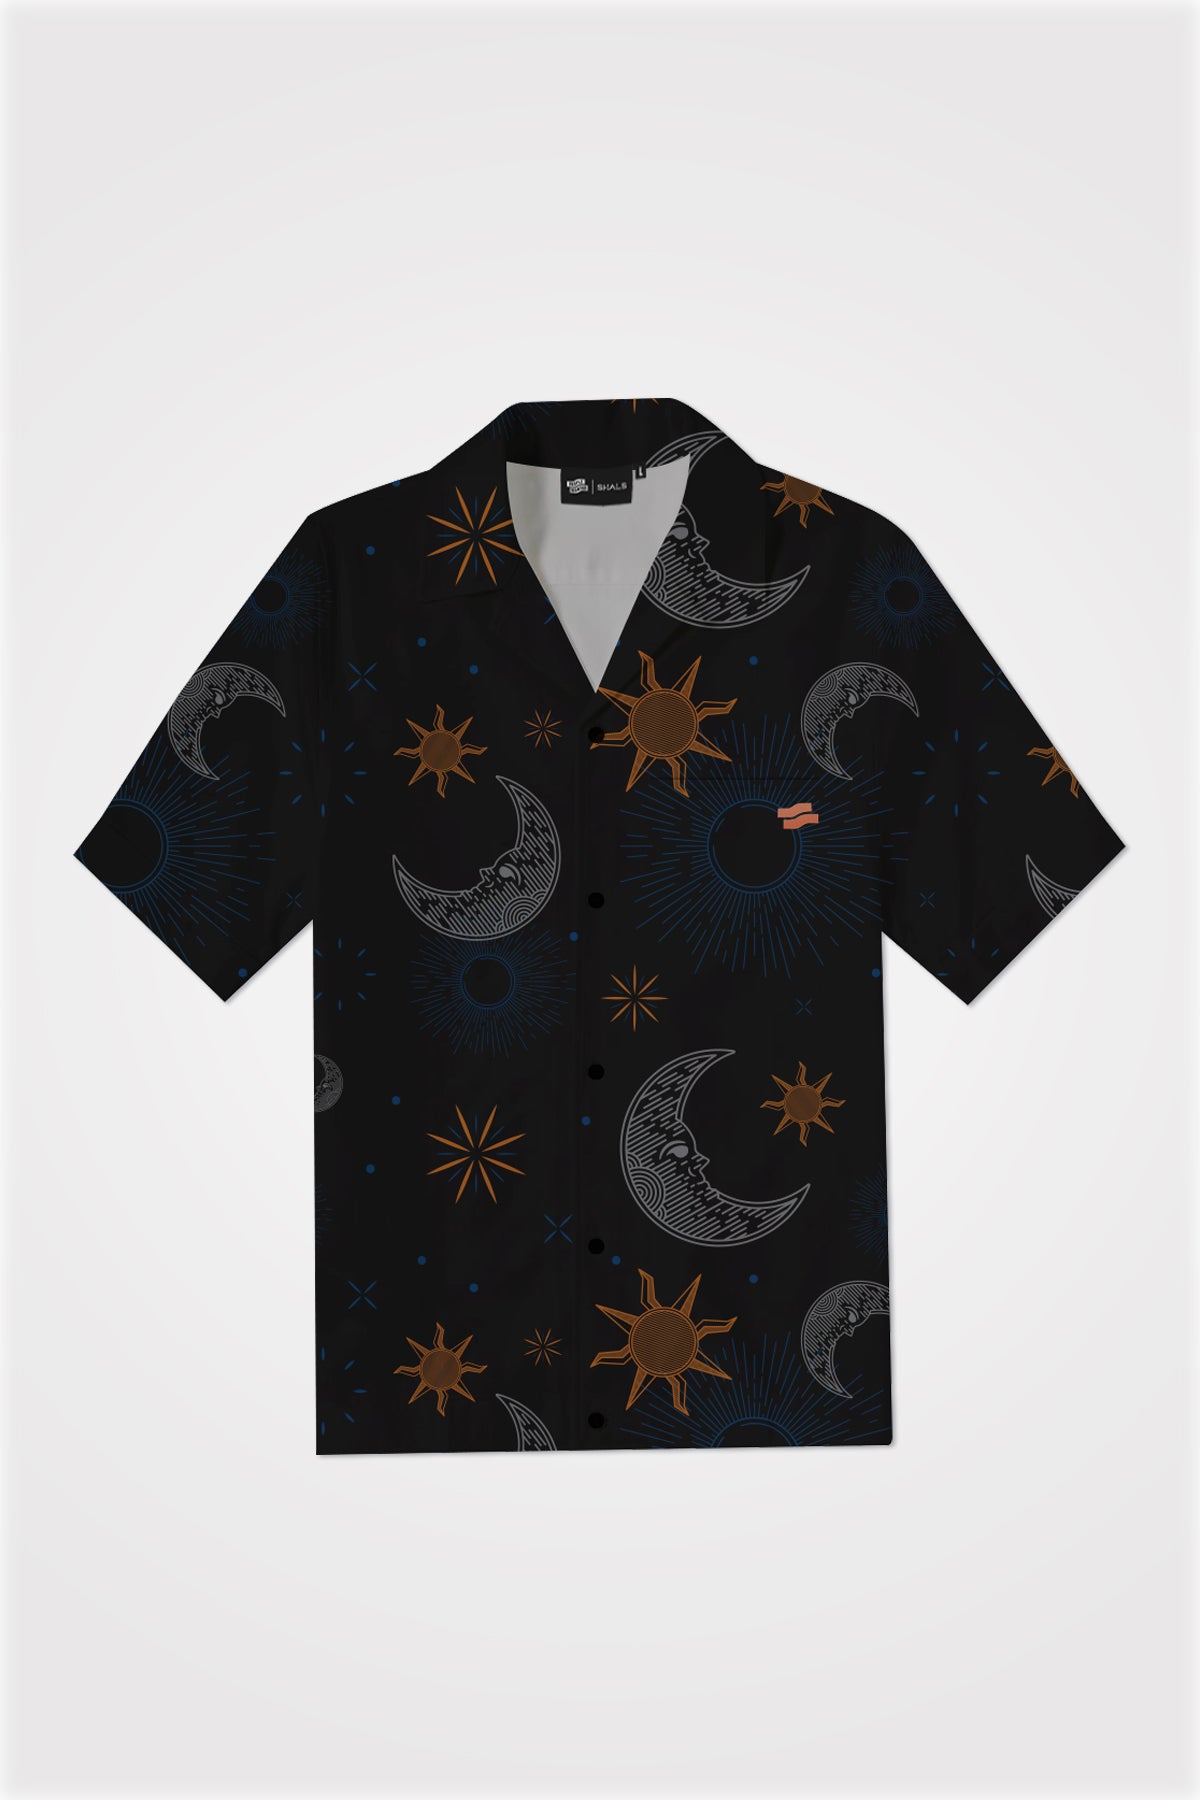 PMC x SHALS Blessings In The Skies Bowling Shirt Black